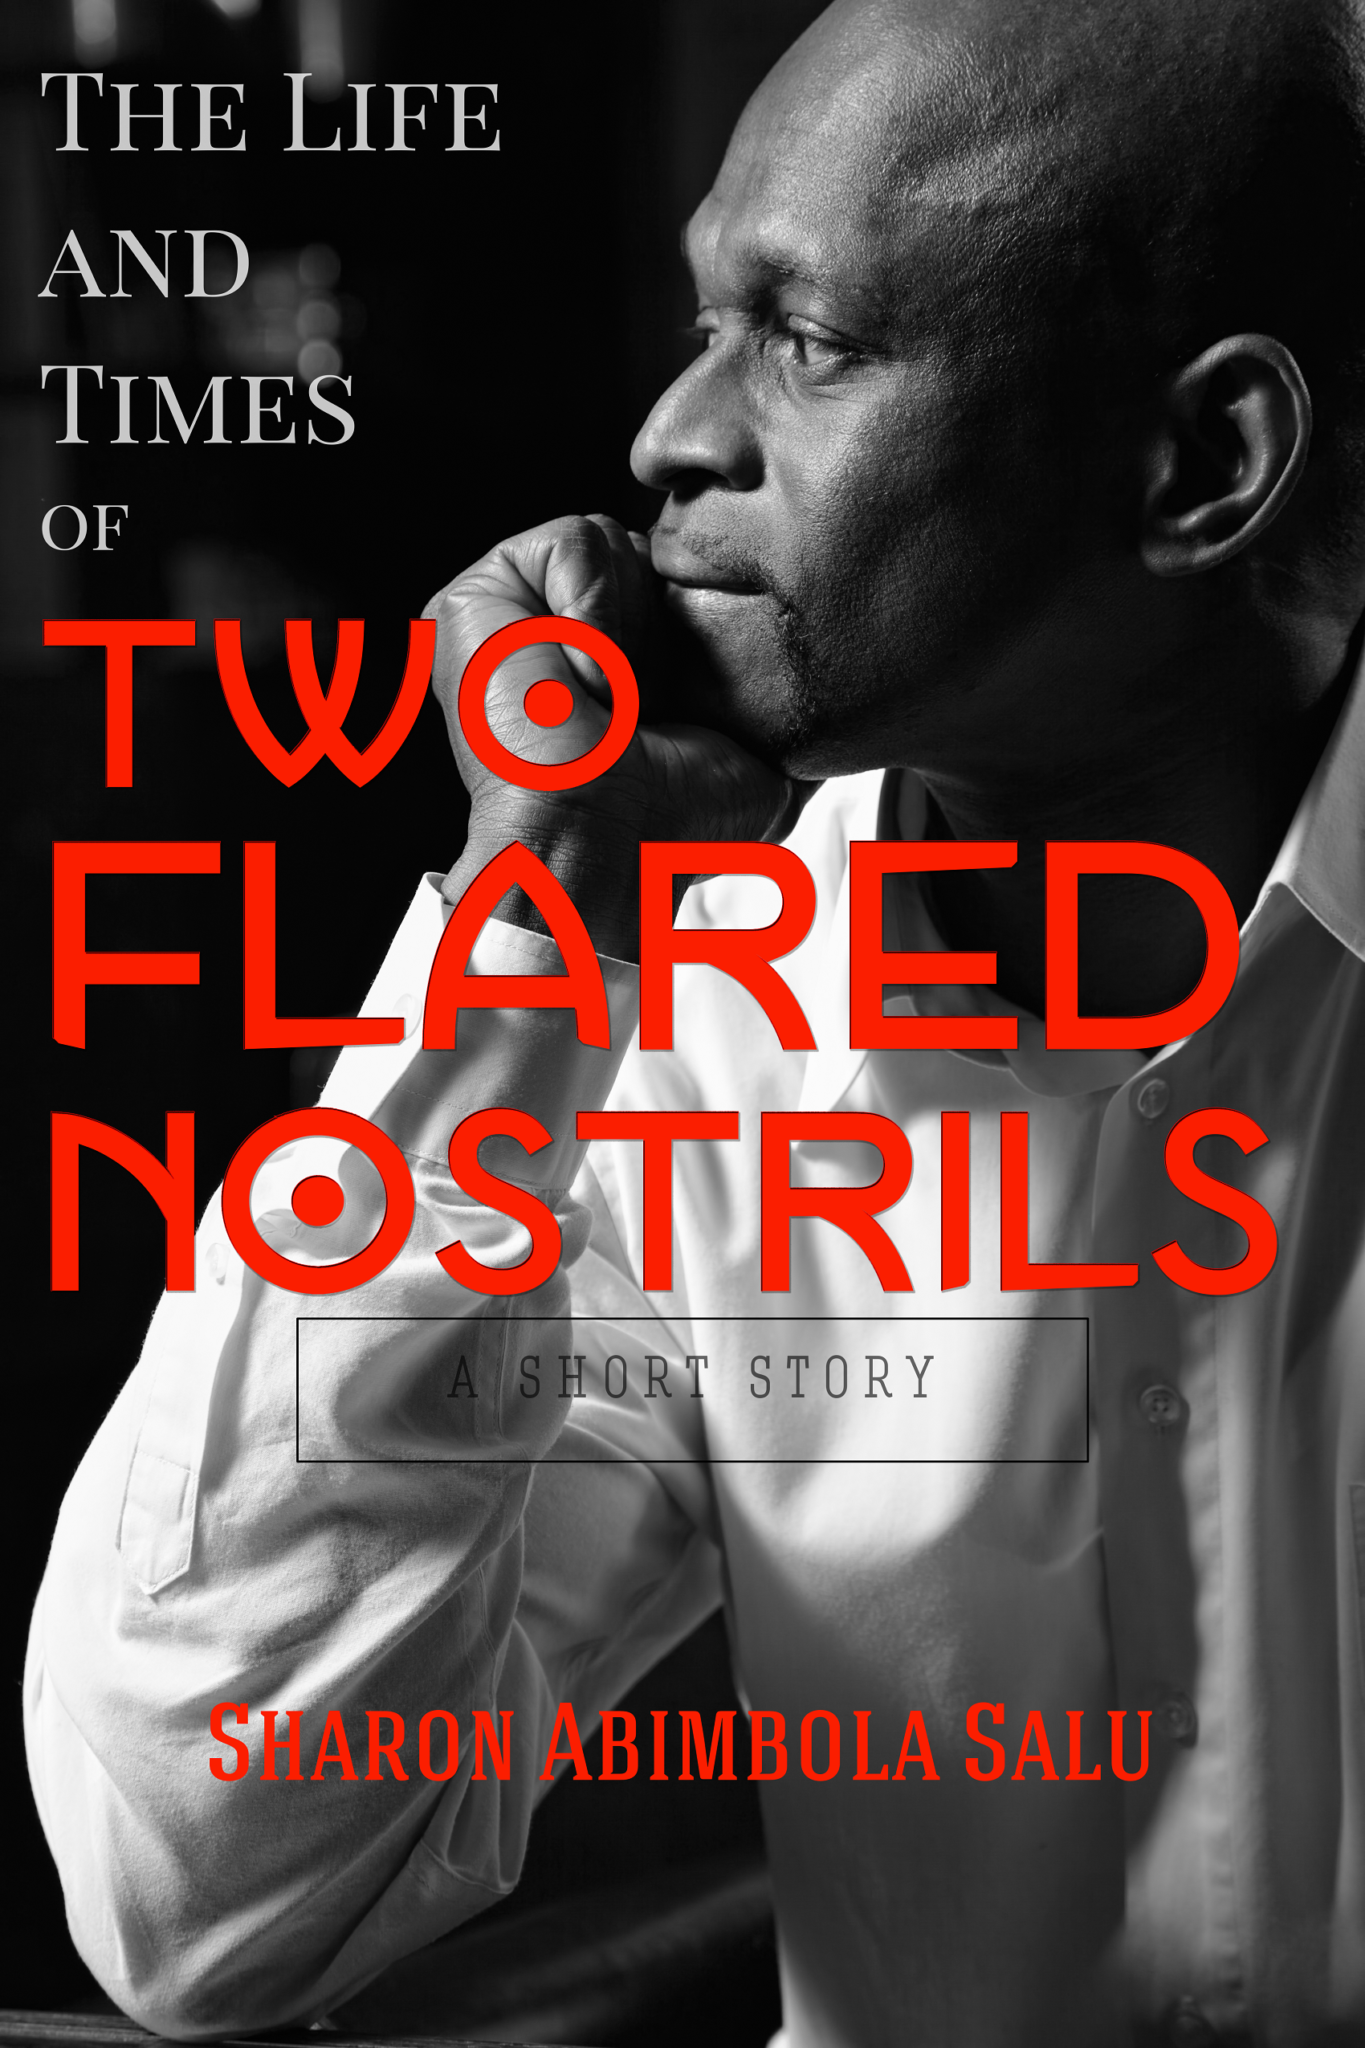 The Life and Times of Two Flared Nostrils - Book Cover (1700 x 2550)